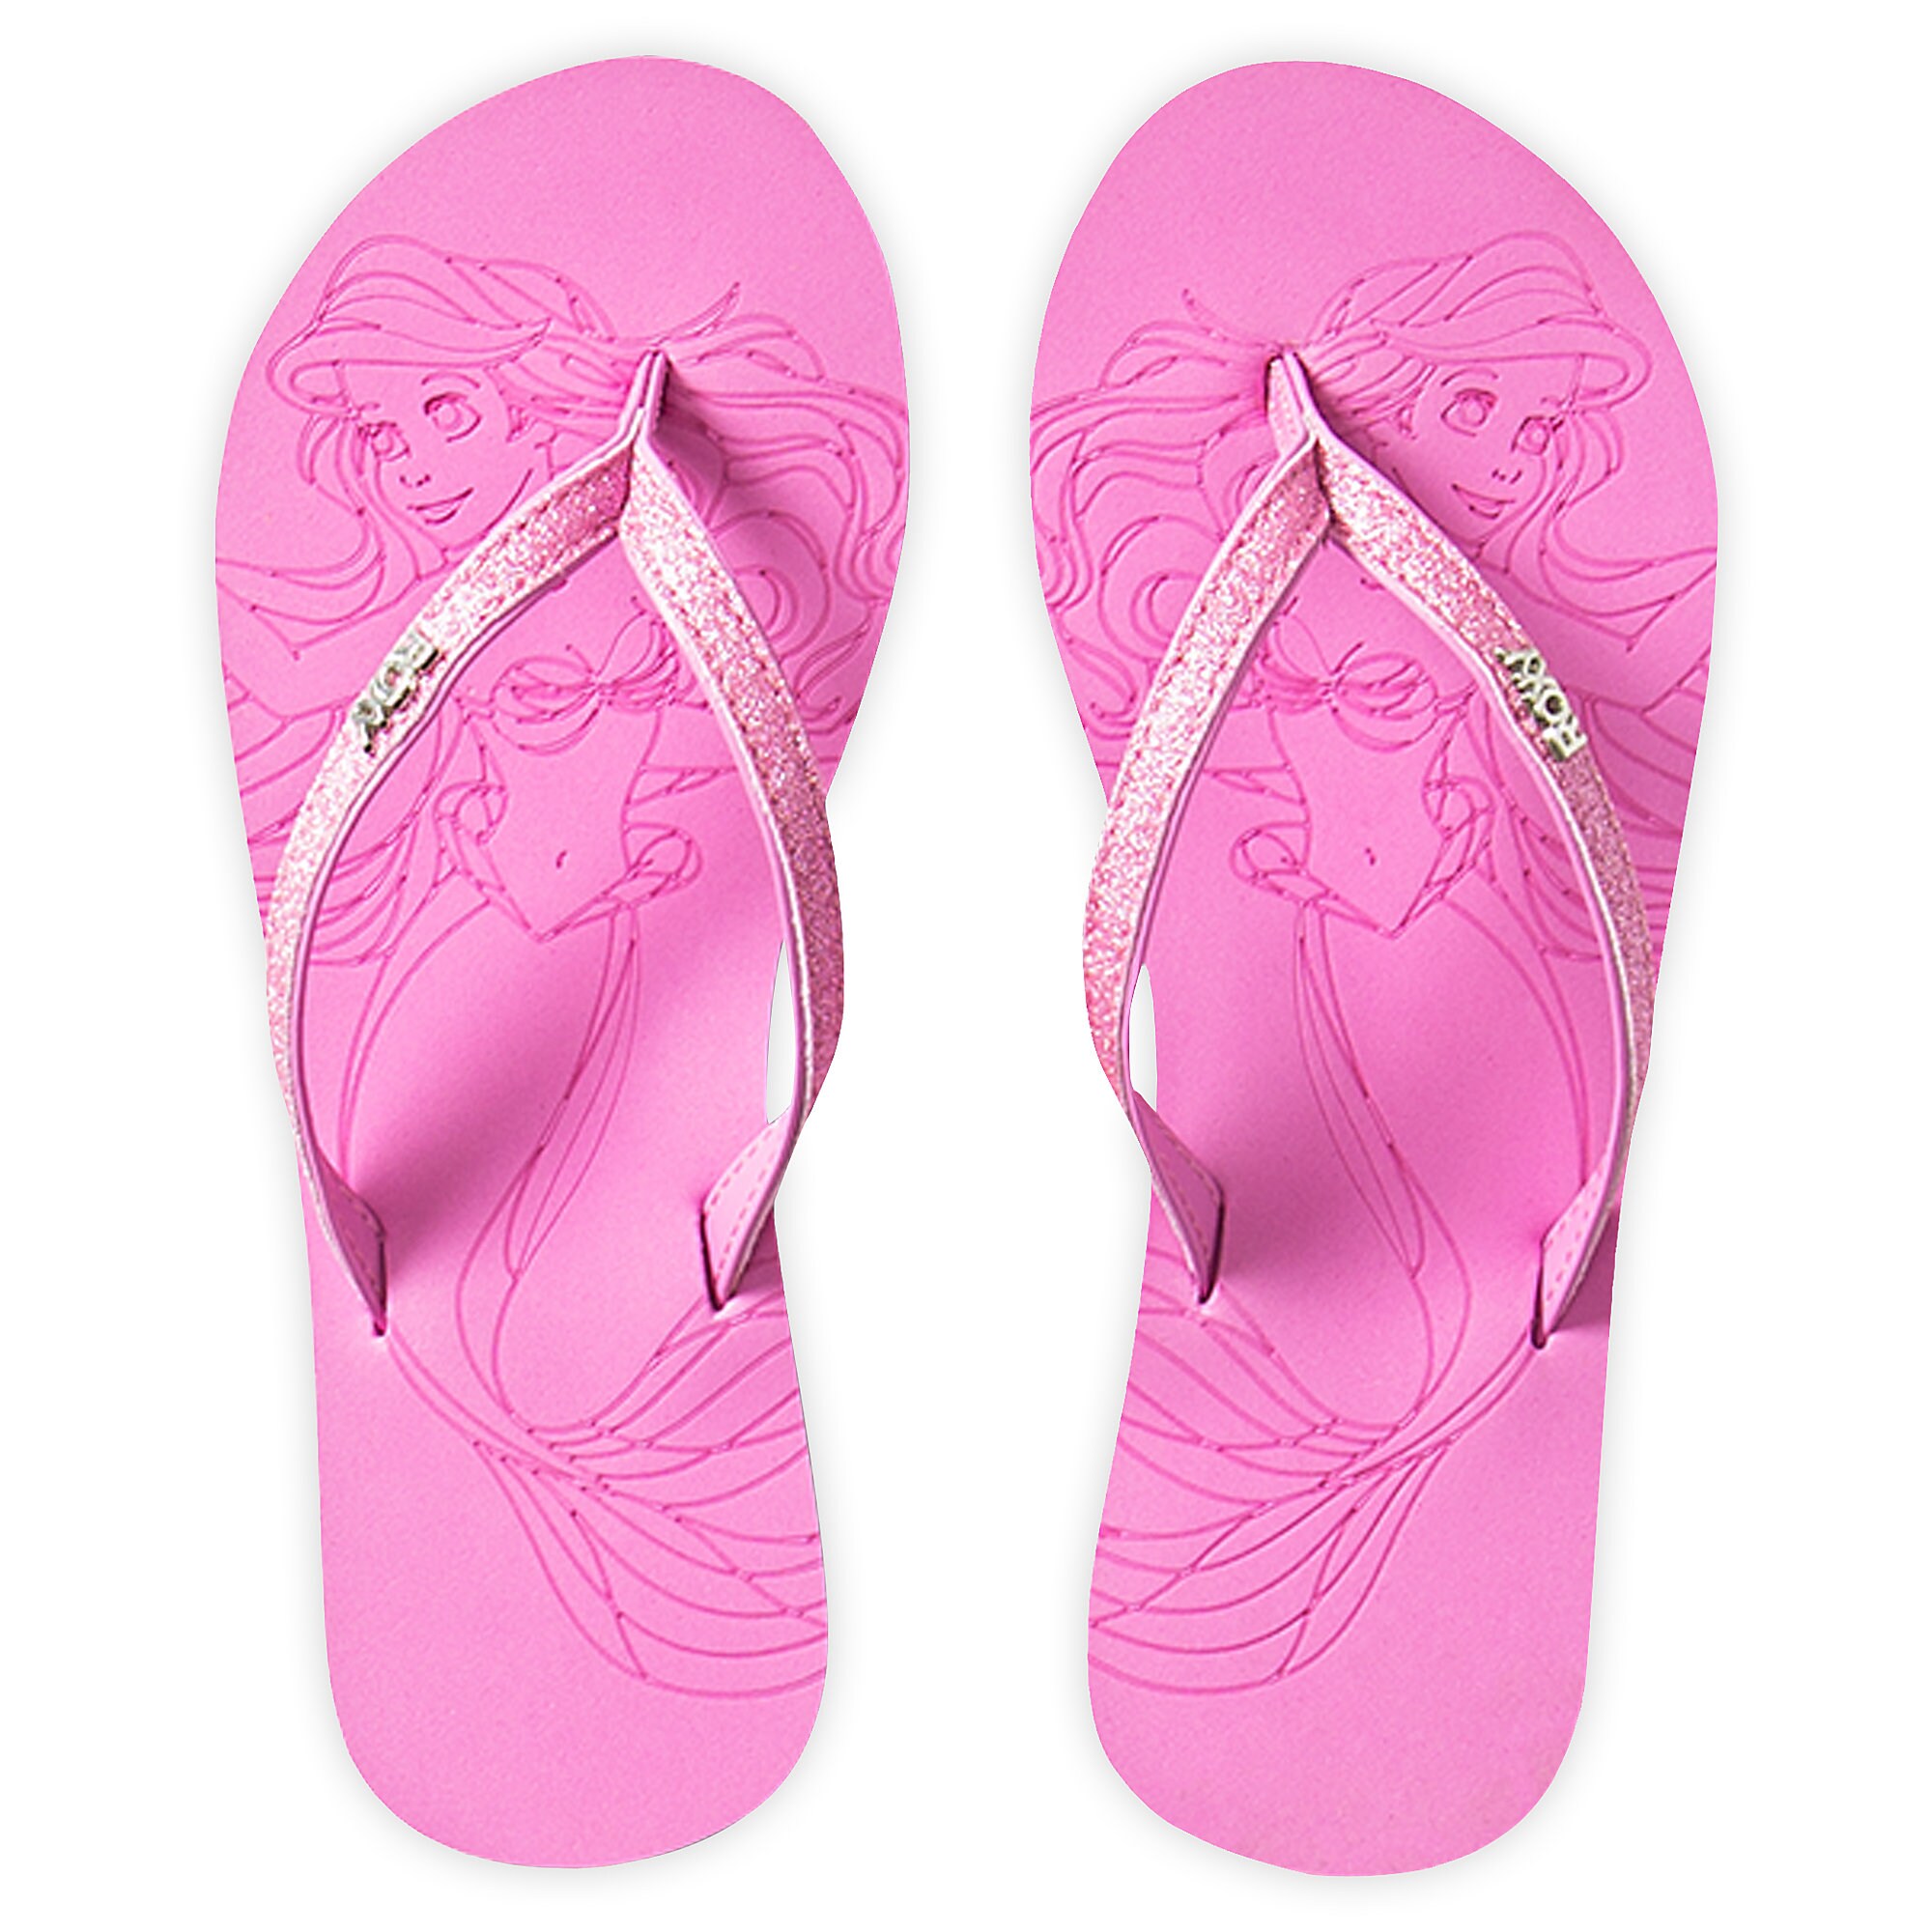 Ariel Flip Flops for Girls by ROXY Girl is now out – Dis Merchandise News